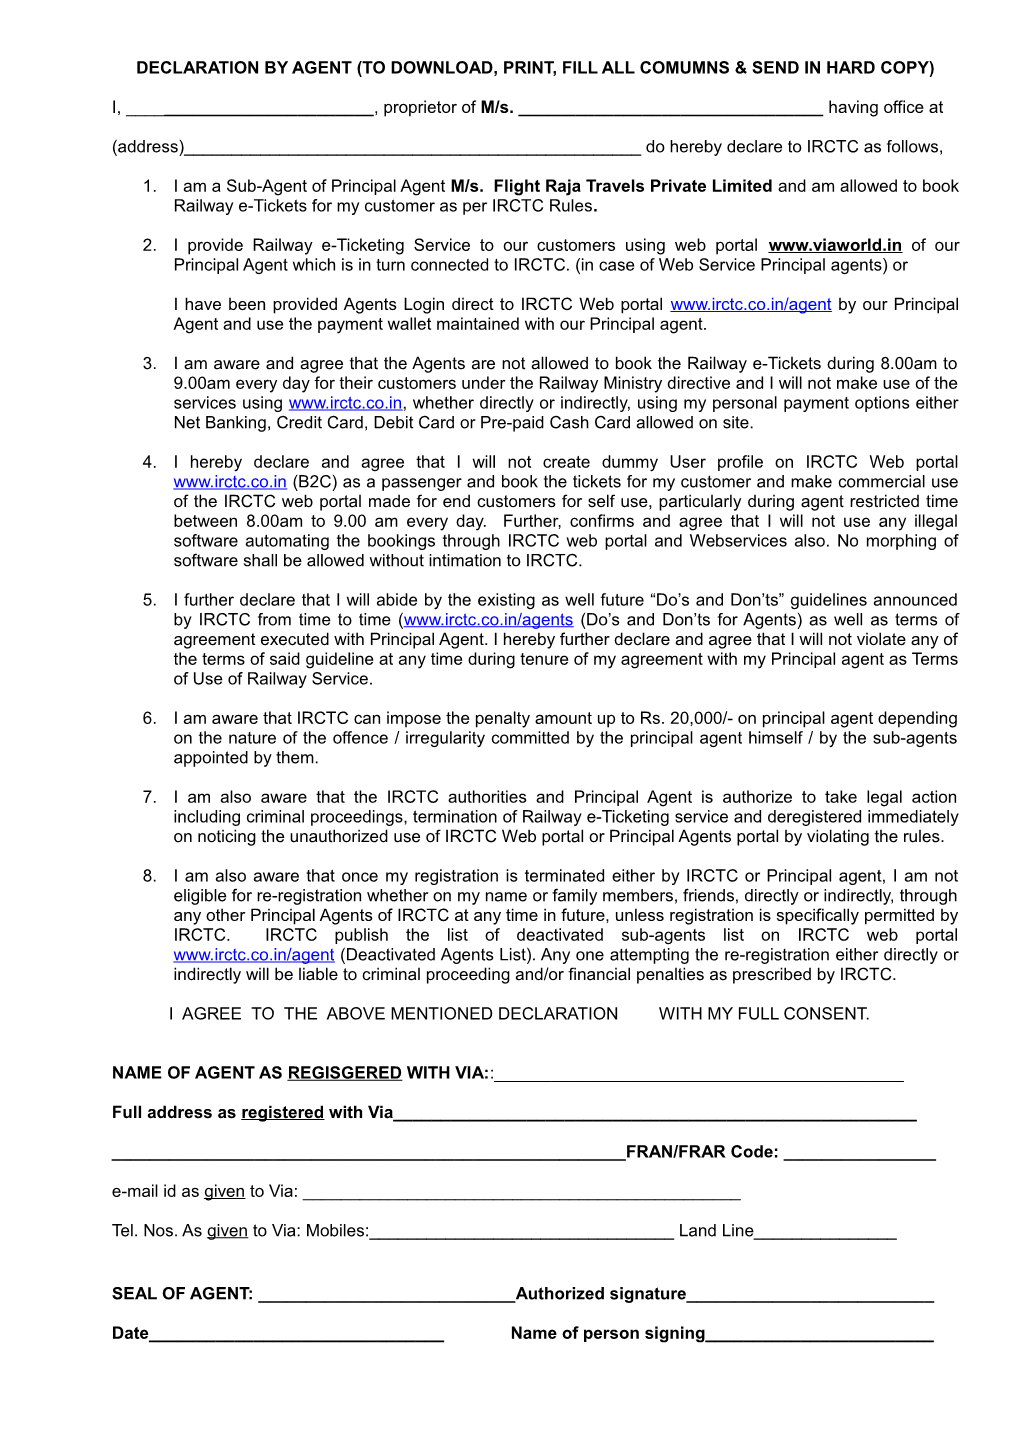 Declaration by Agent (To Download, Print, Fill All Comumns & Send in Hard Copy)